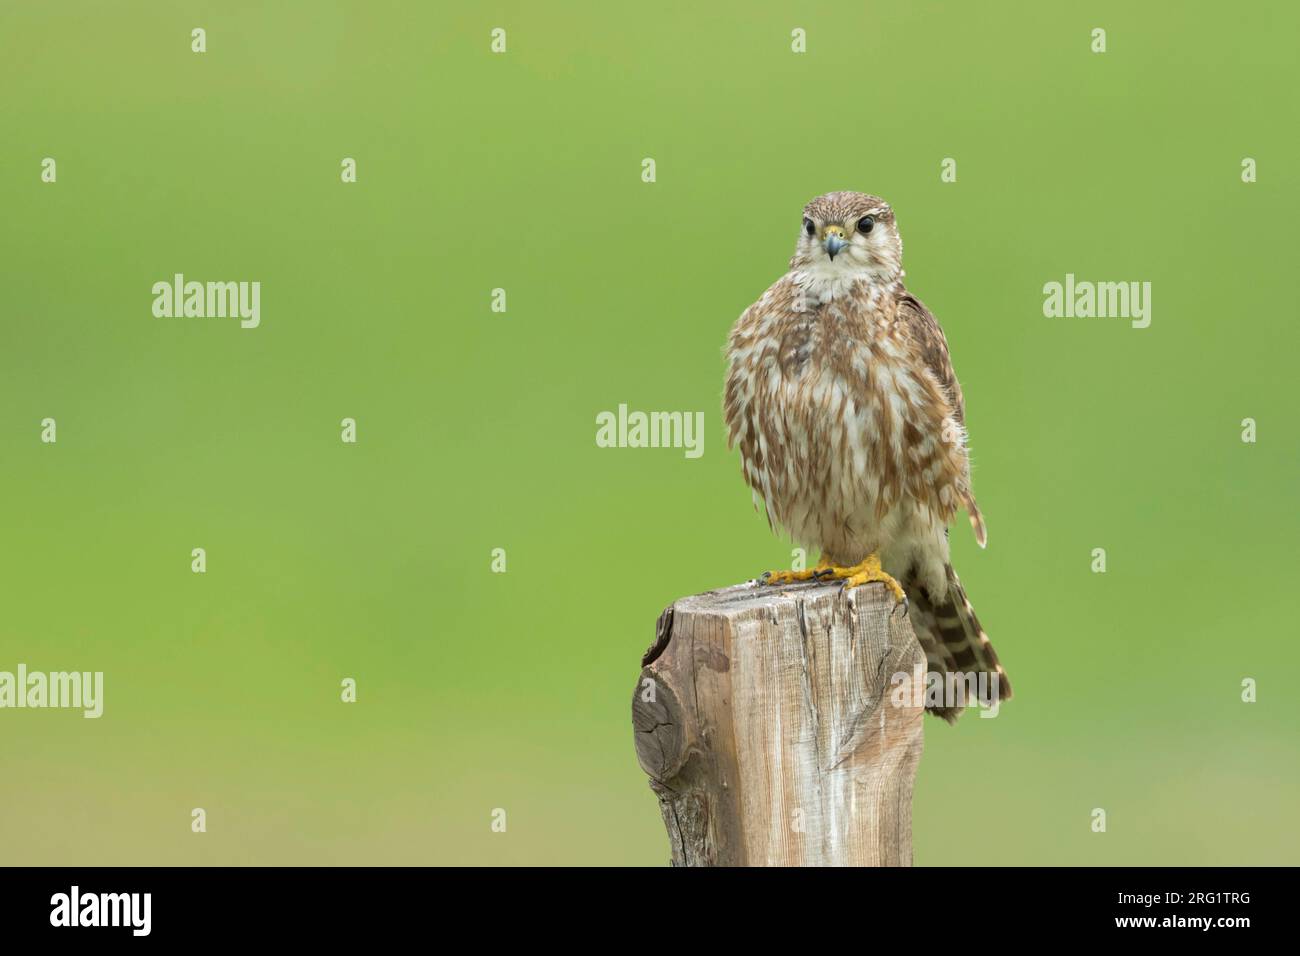 Adult female Merlin (Falco columbarius aesalon) during spring season in breeding area in Russia (Baikal). Sitting on a wooden pole in green meadow. Stock Photo